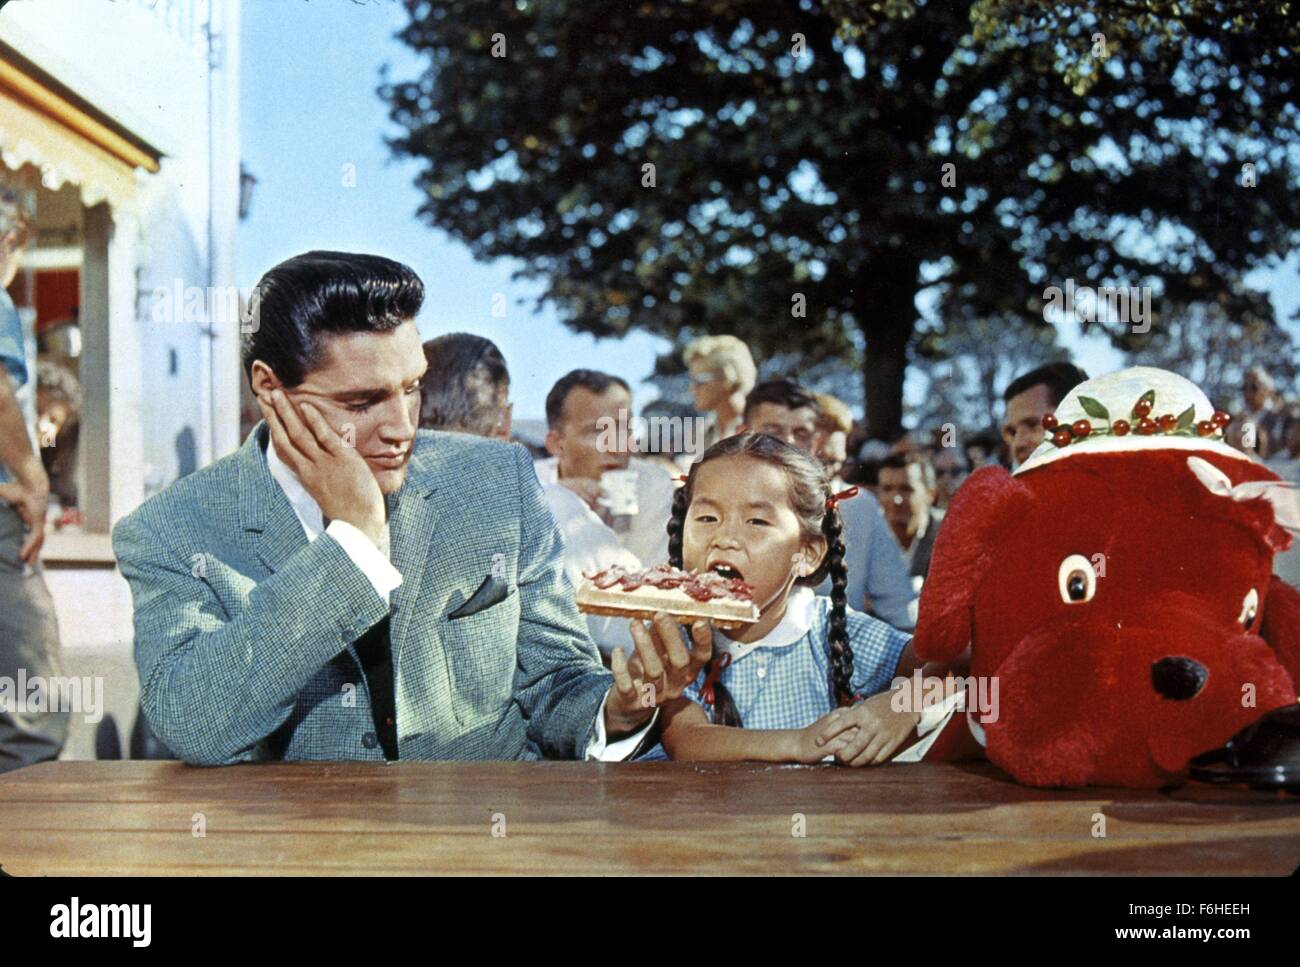 1963, Film Title: IT HAPPENED AT THE WORLD'S FAIR, Director: NORMAN TAUROG, Studio: MGM, Pictured: ELVIS PRESLEY, NORMAN TAUROG. (Credit Image: SNAP) Stock Photo